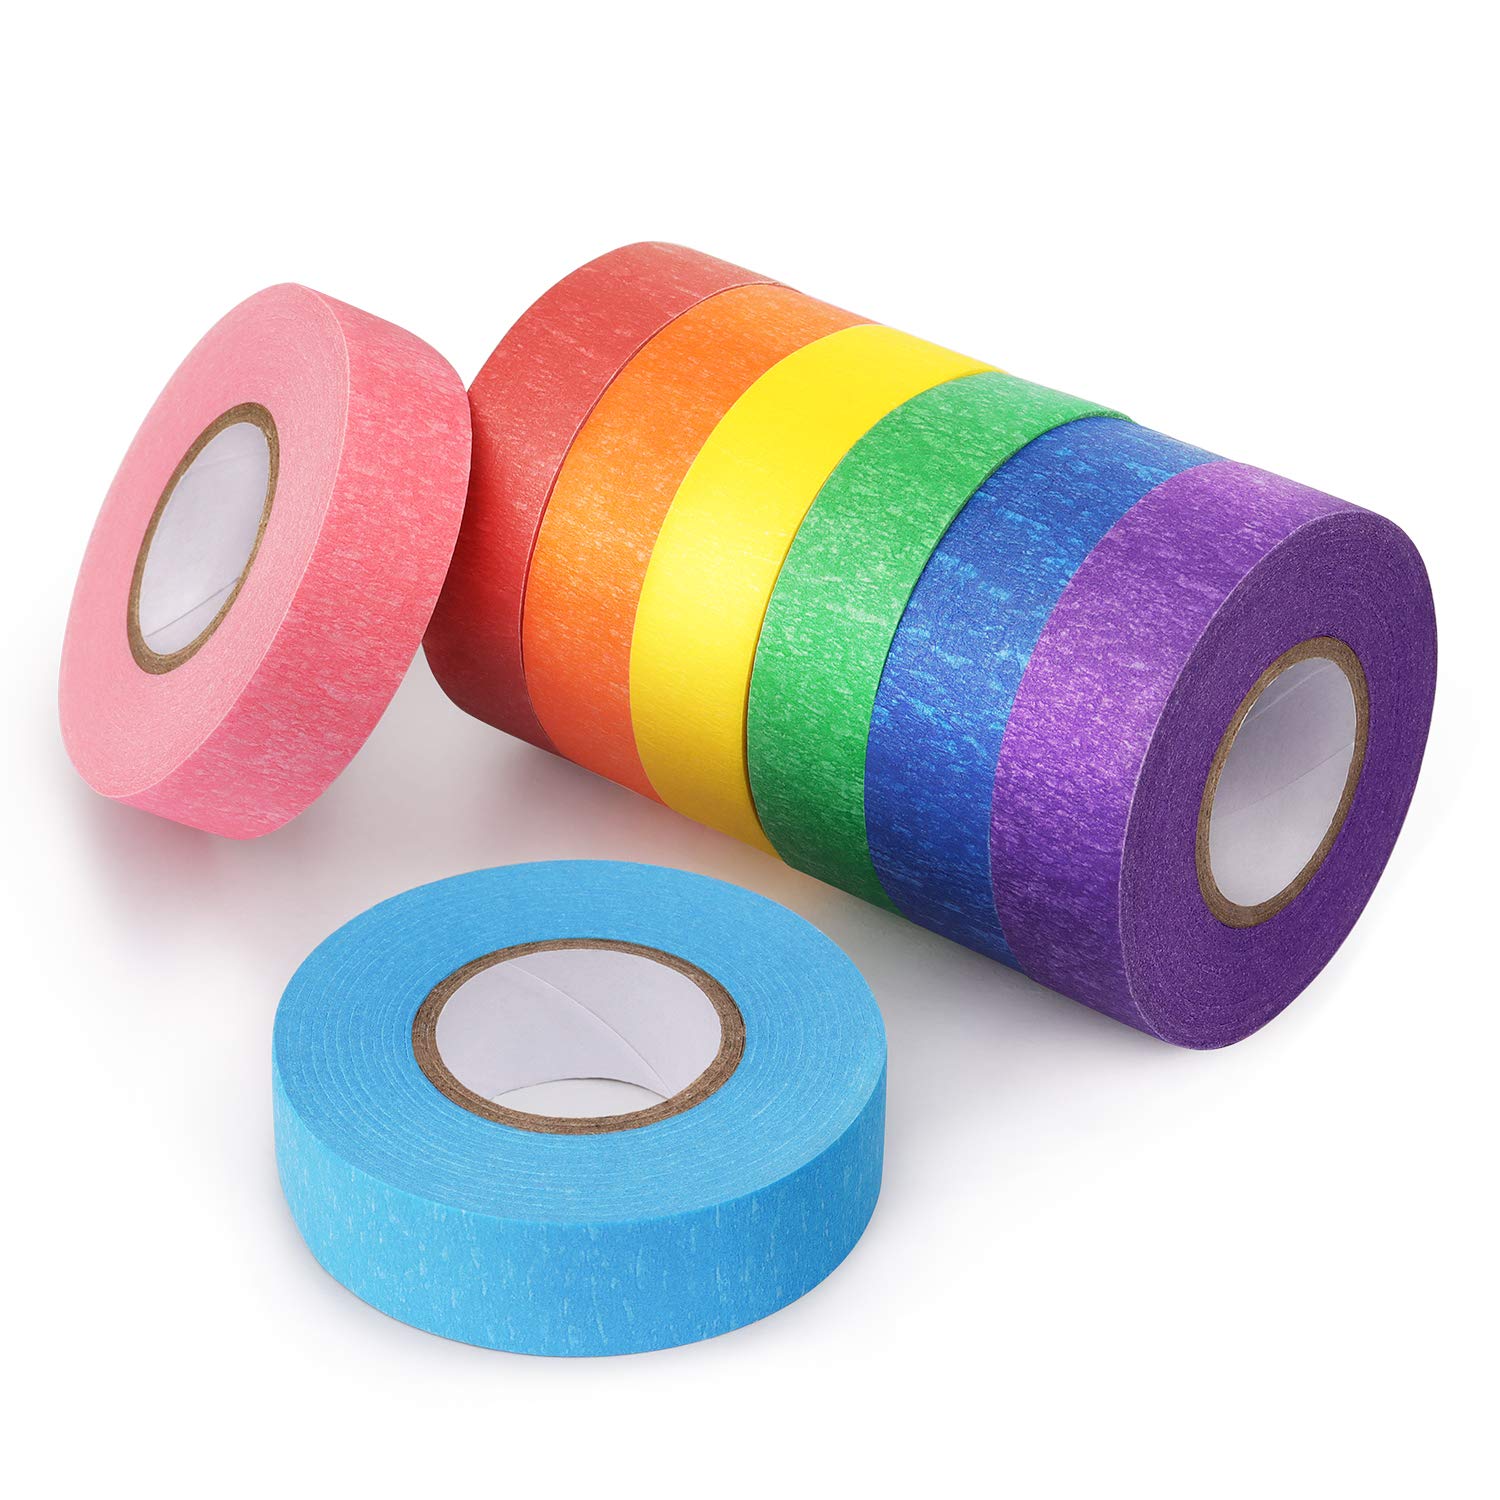 Generic 8 Rolls Colored Masking Tape Rainbow Colors Painters Tape Colorful Craft Art Paper Tape for Kids Labeling Arts Crafts DIY Decor